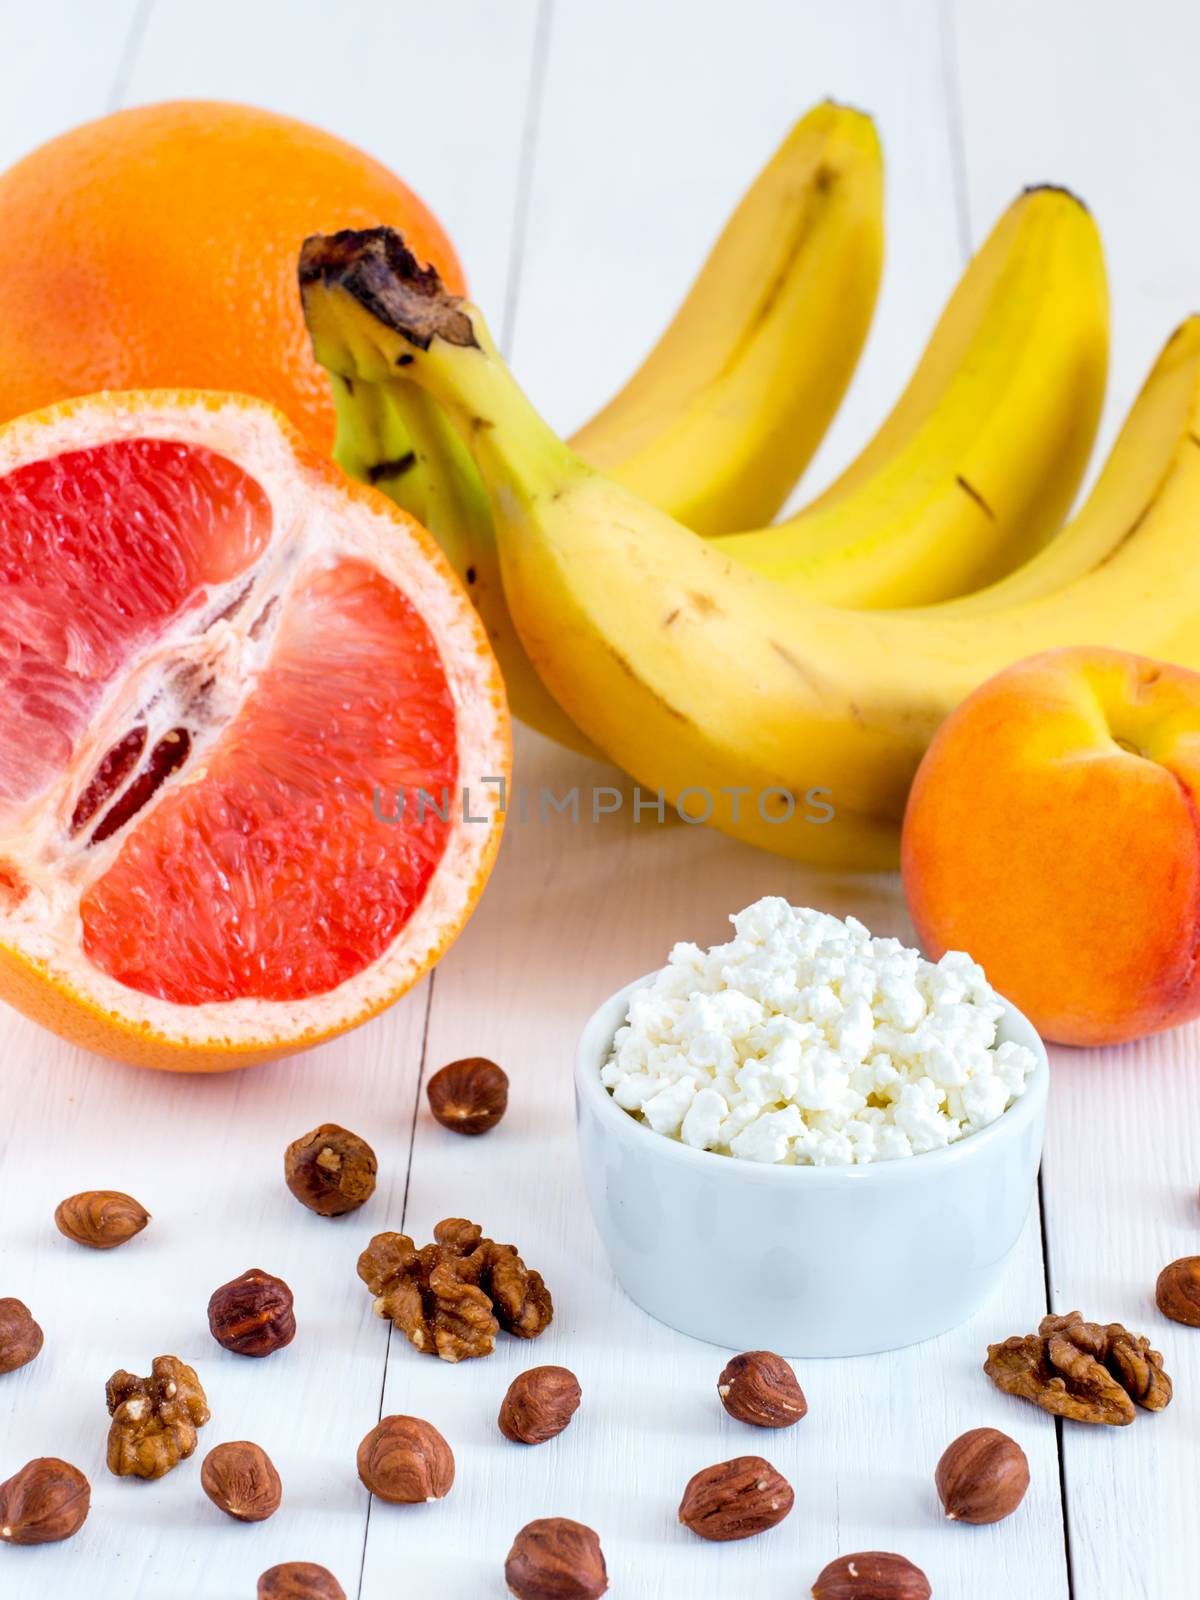 Healthy breakfast: cottage cheese, fruits and nuts on white wooden background. Dieting, healthy lifestyle concept meal. Vertical